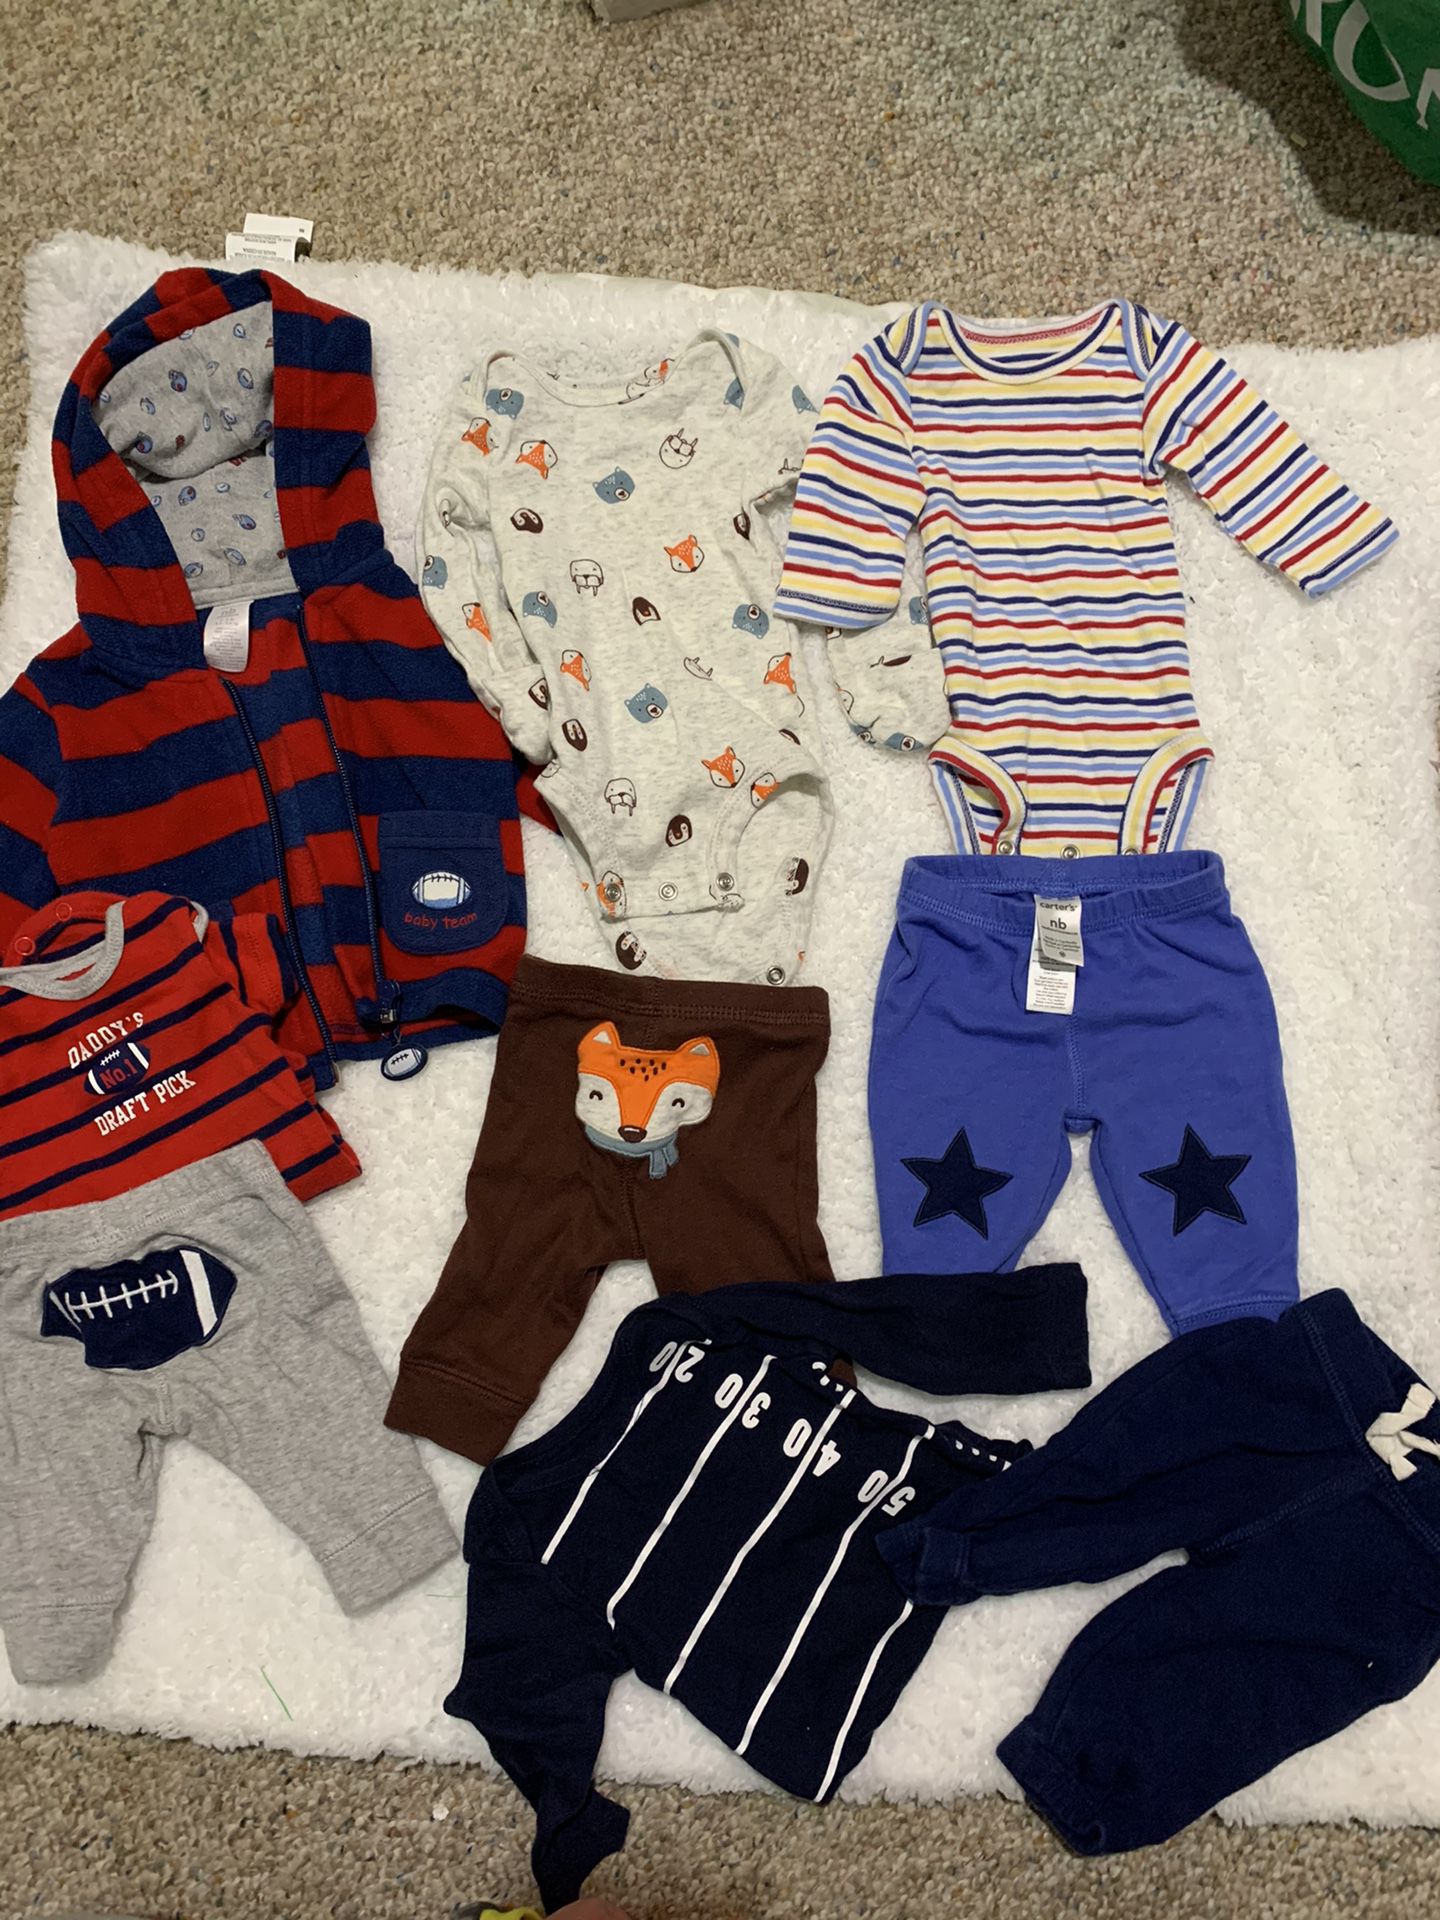 Carters Newborn outfits!